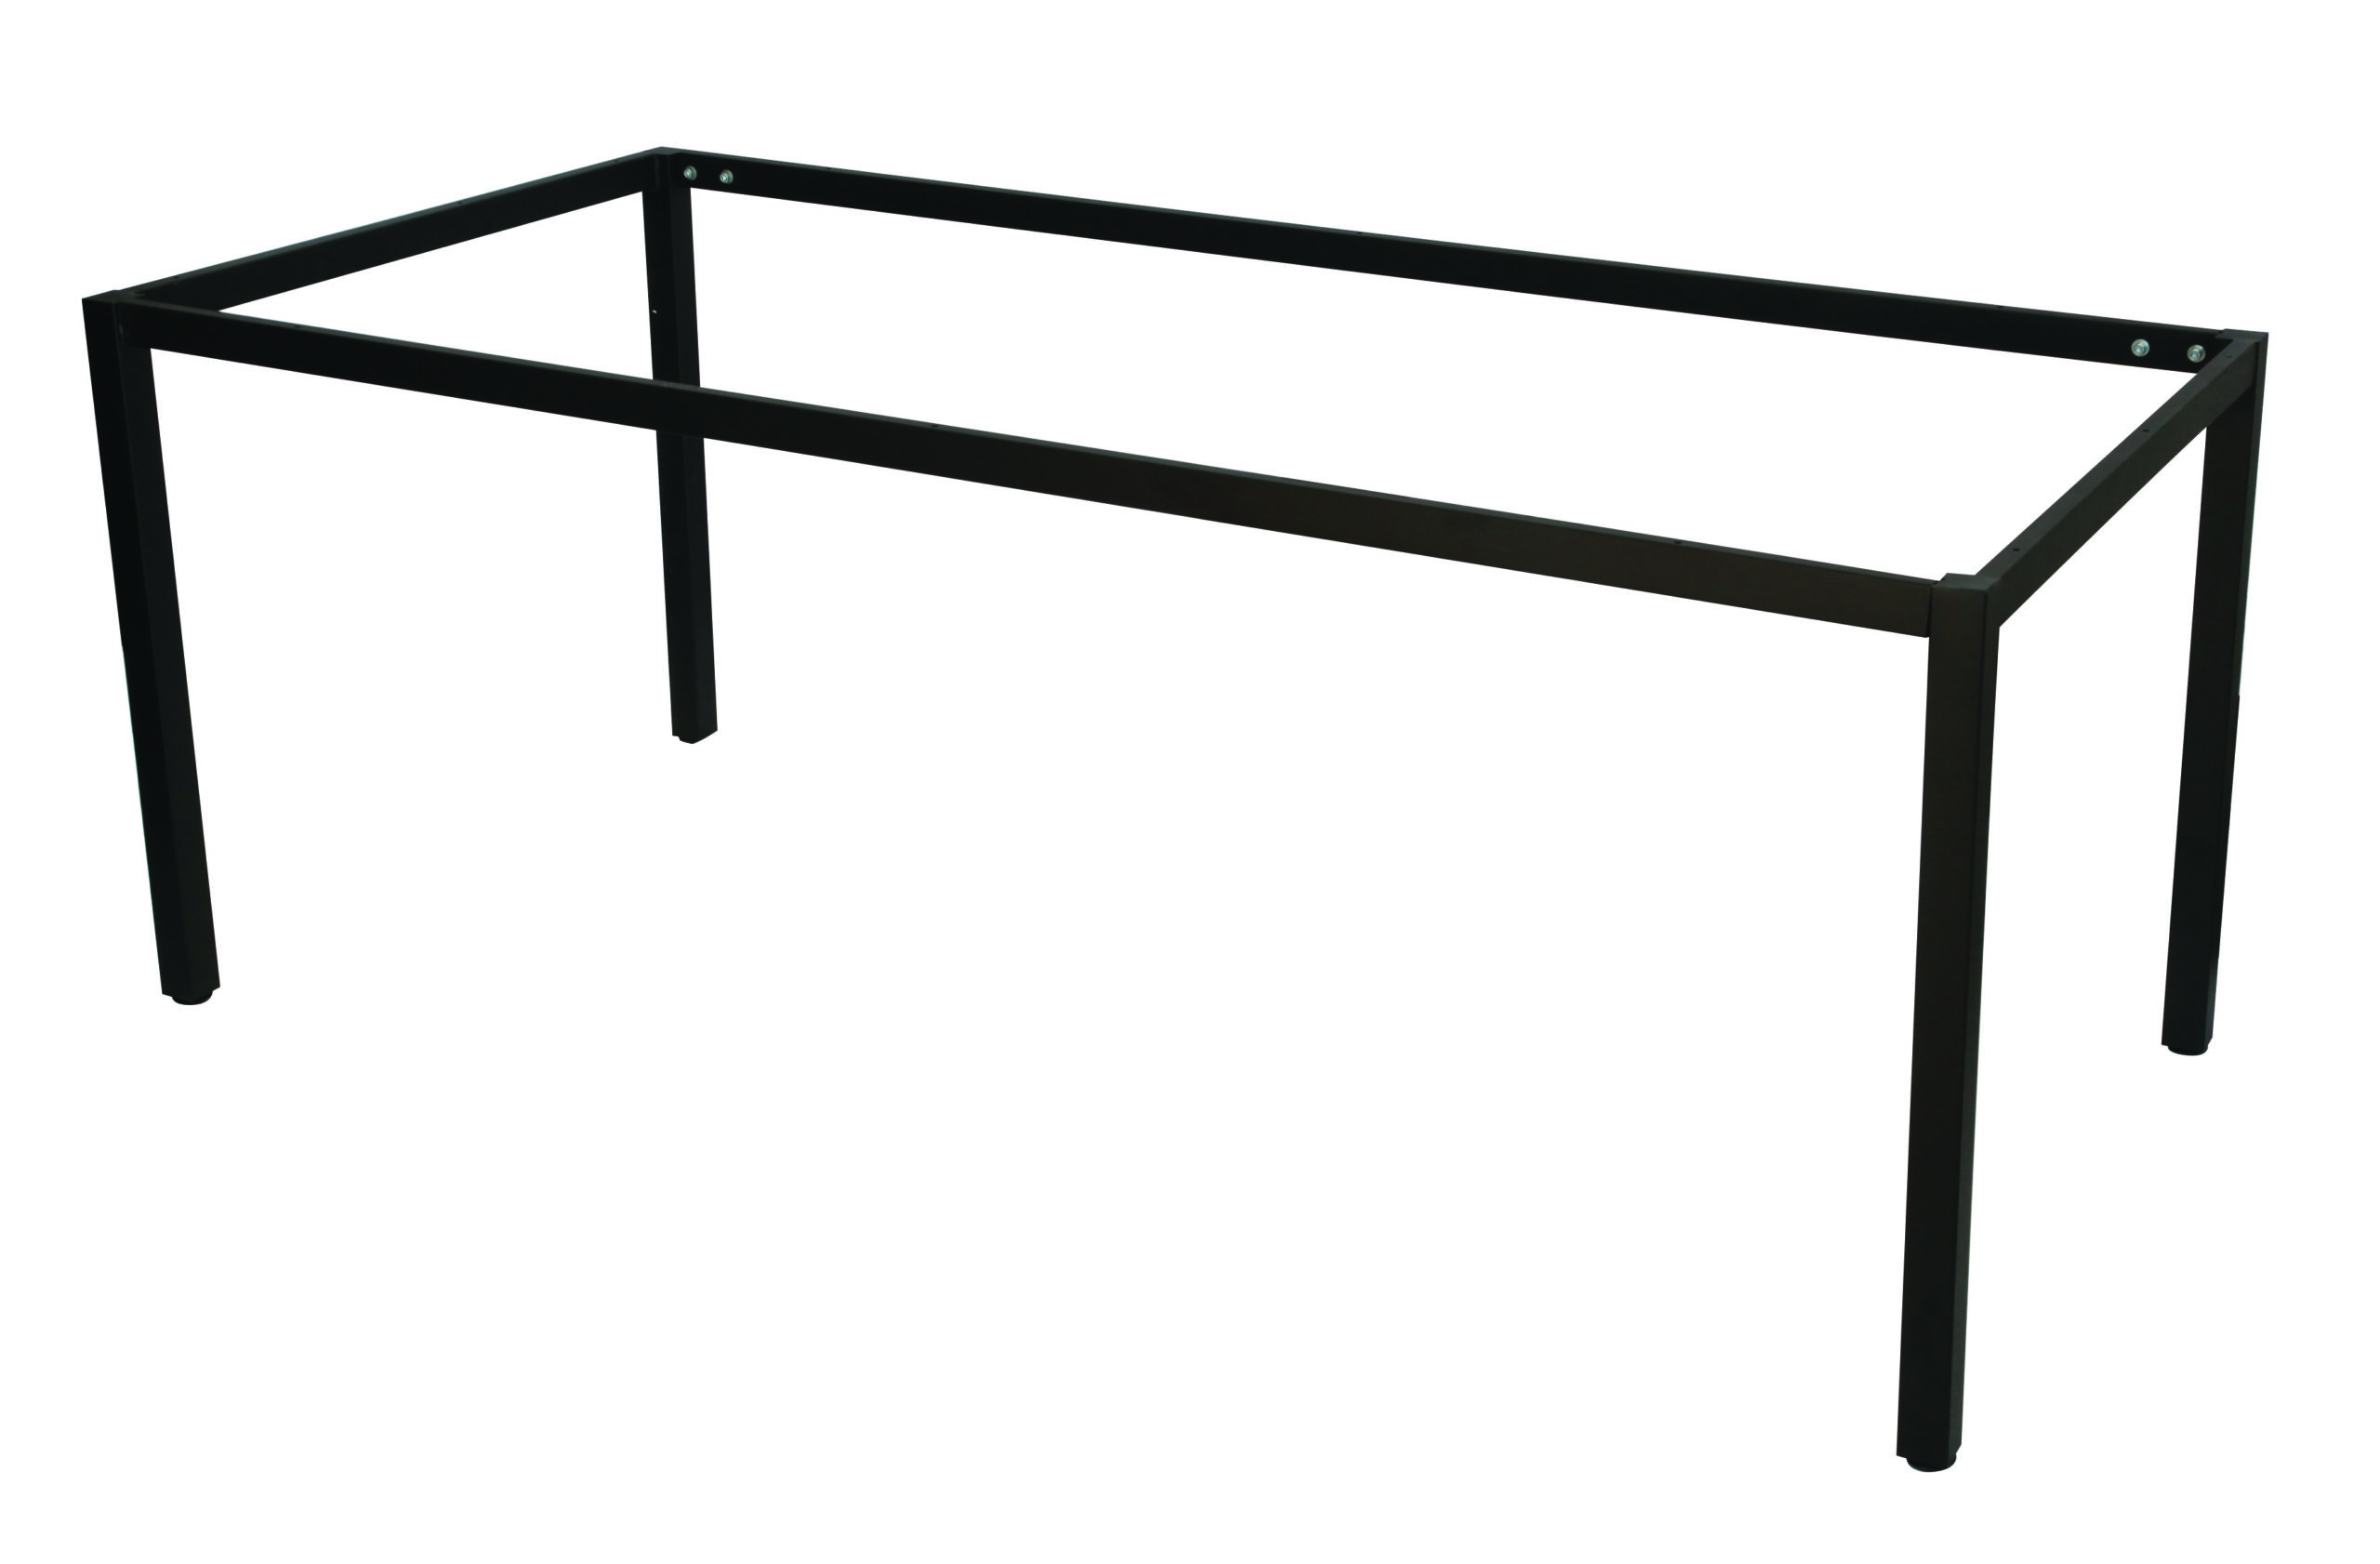 Steel Table Frame (1200W x 705H x 600D)